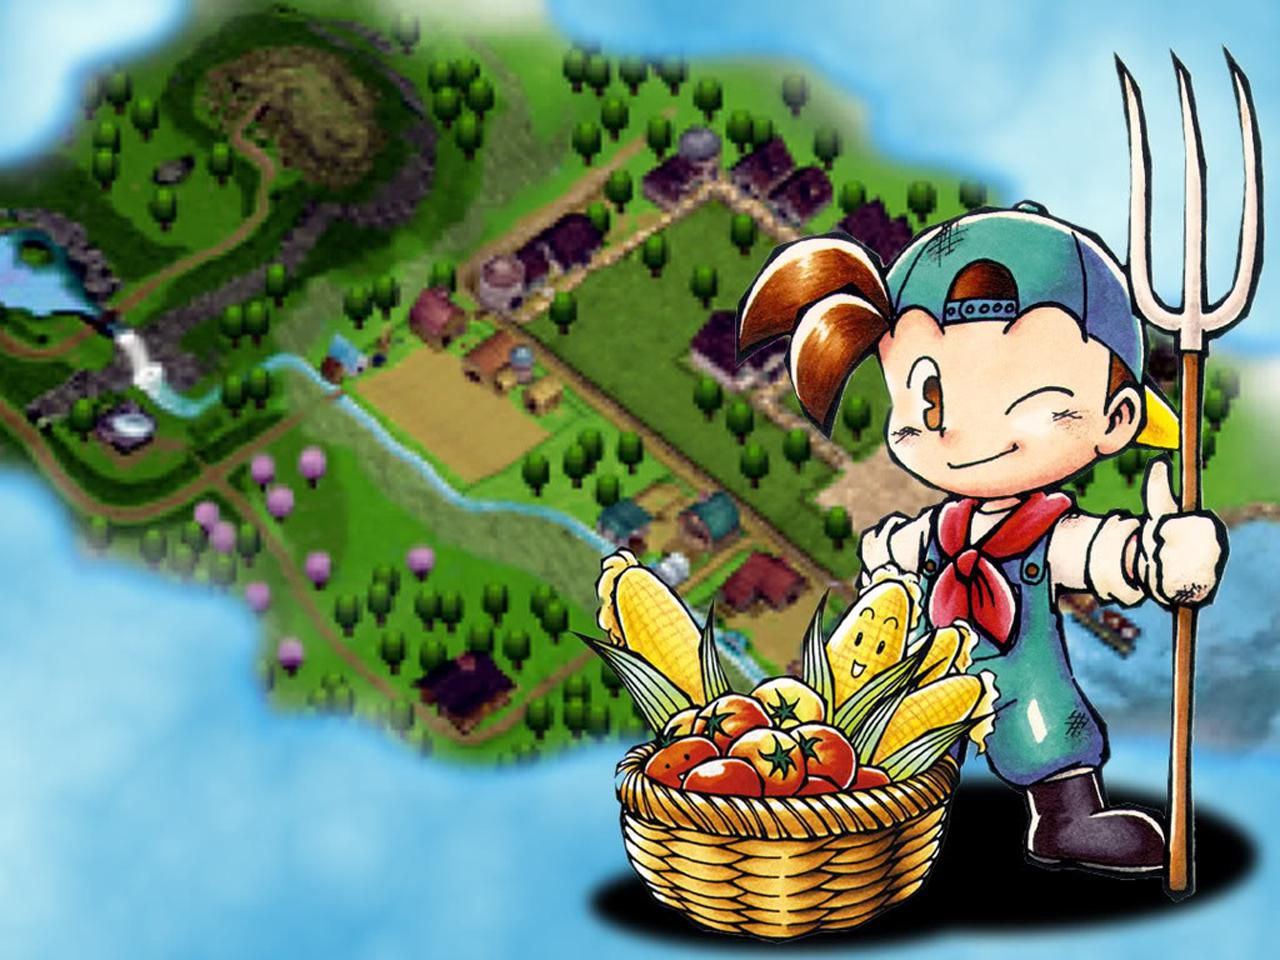  Harvest  Moon  Back  to Nature  Cheats  for PS1